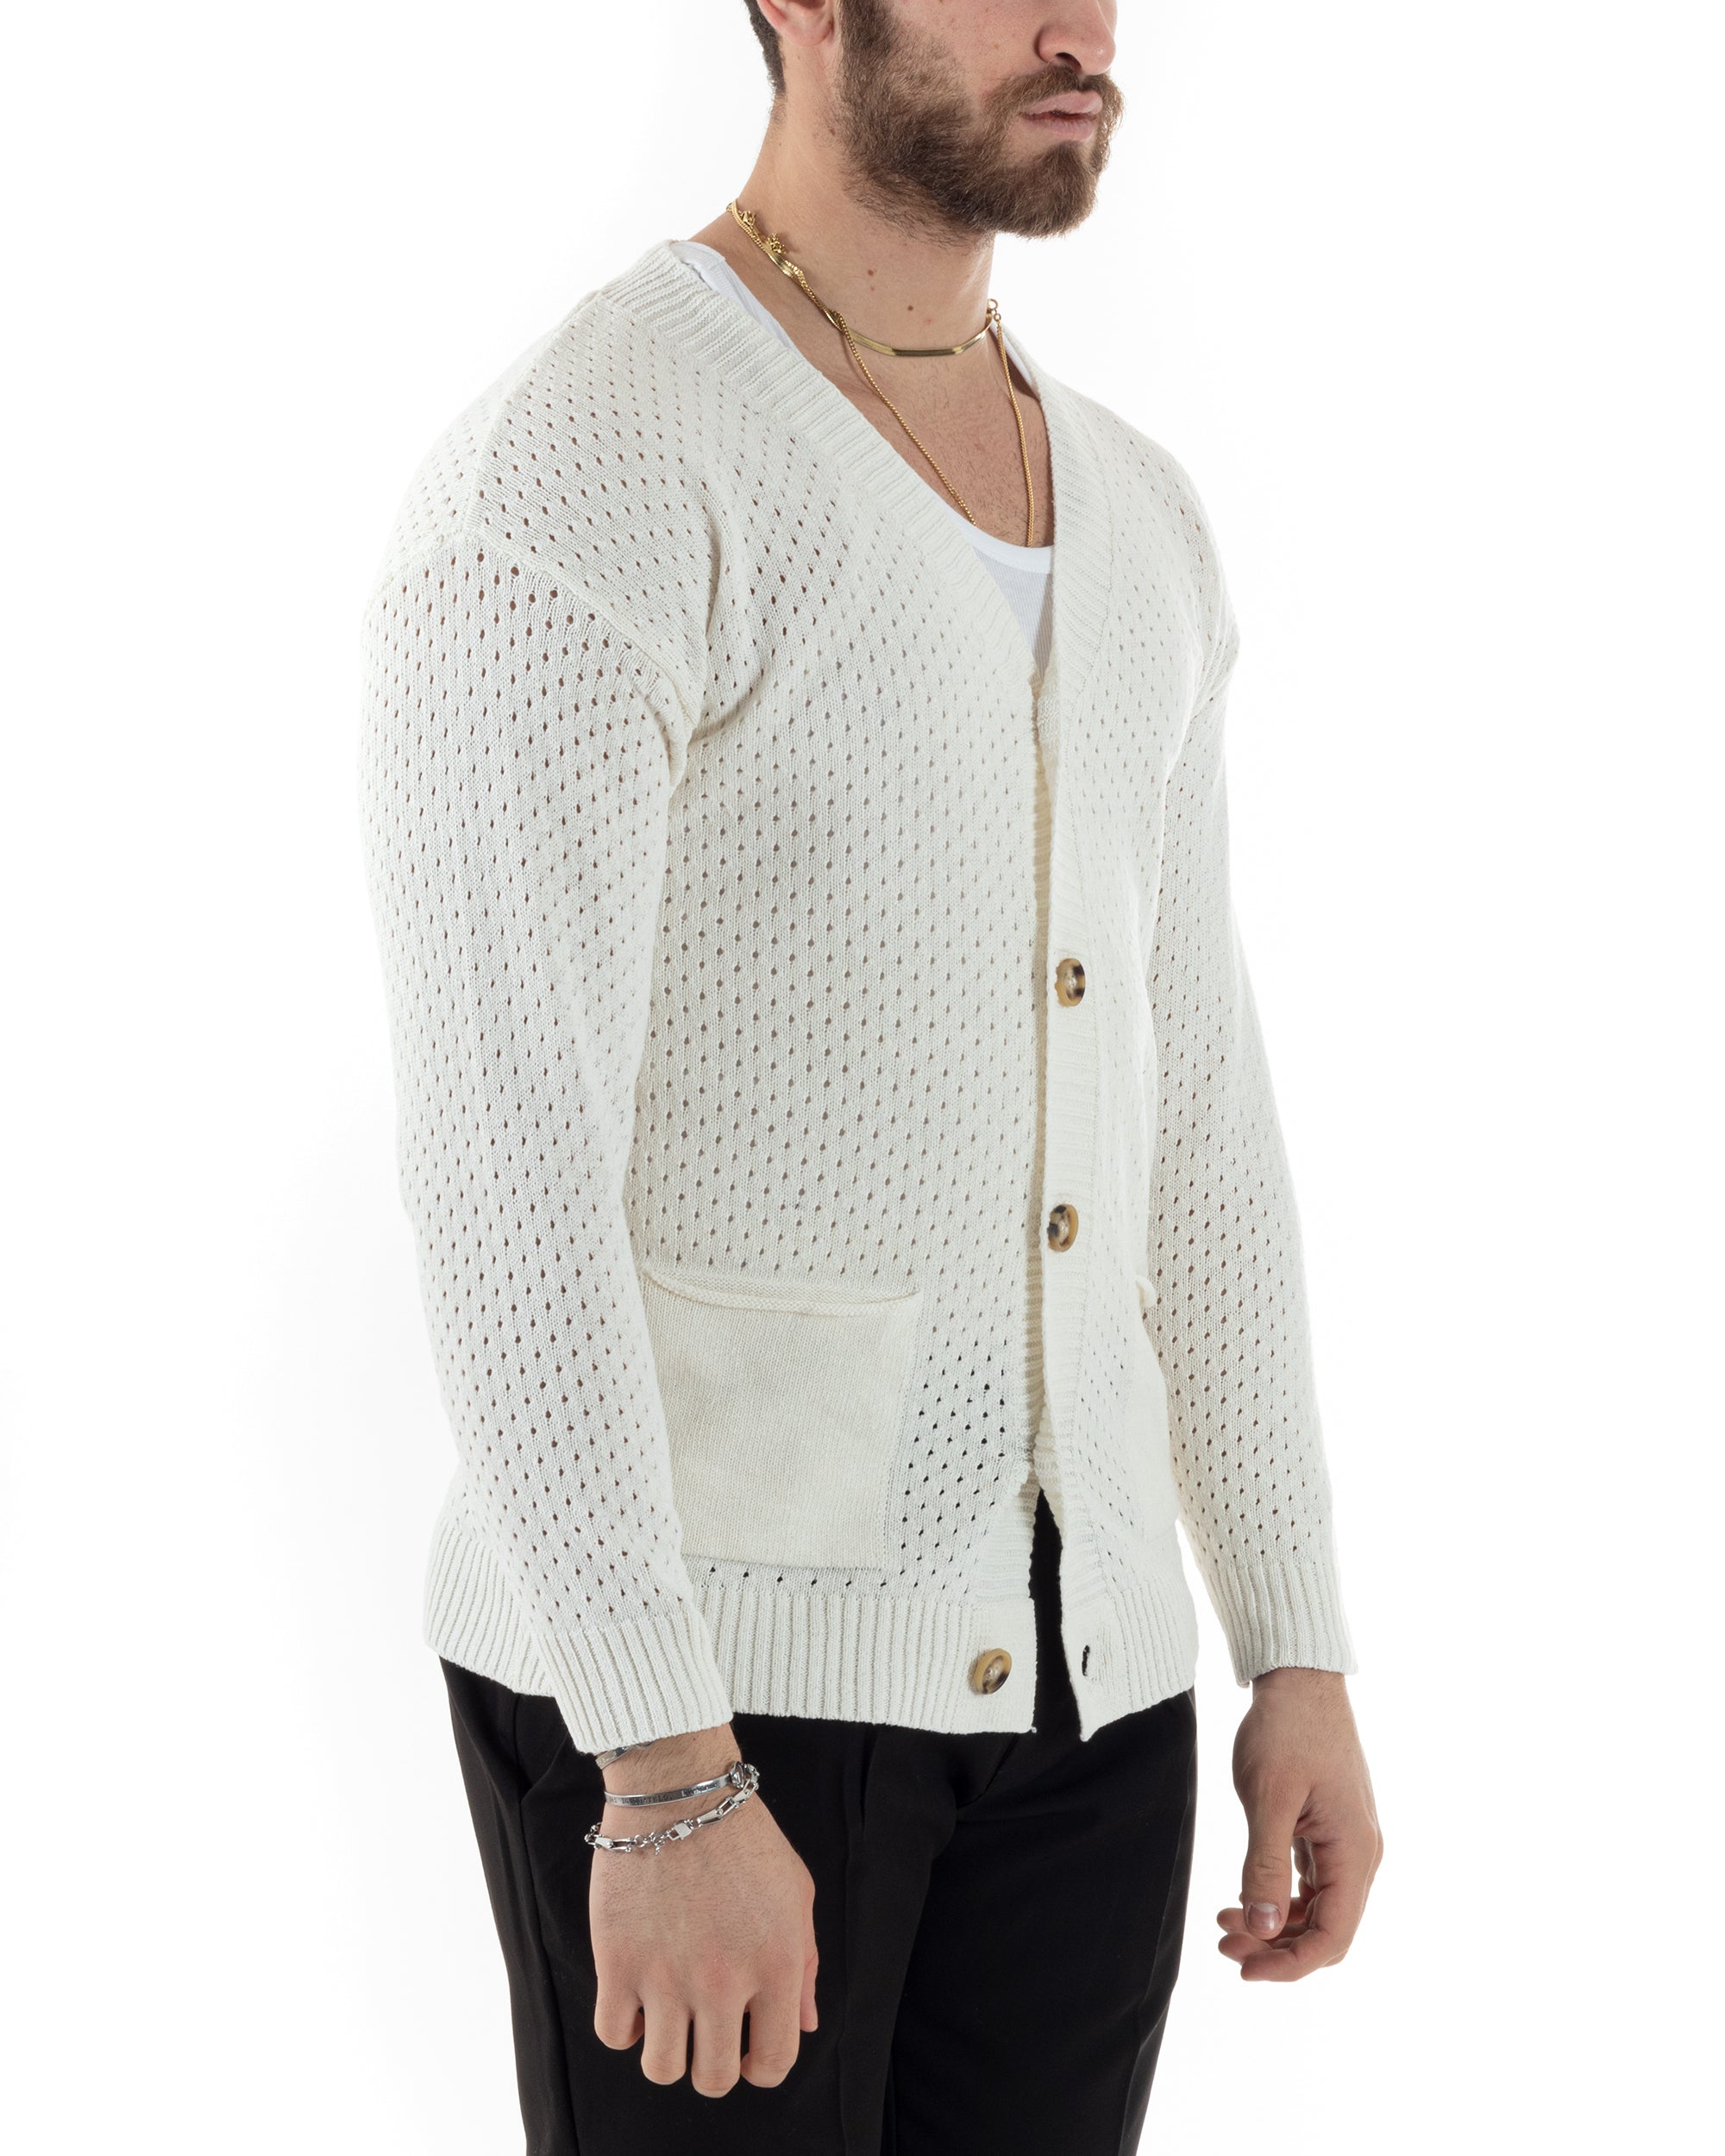 Men's Cardigan Korean Collar Single-breasted Sweater Knit Jacket With Buttons Casual Cream GIOSAL-M2668A